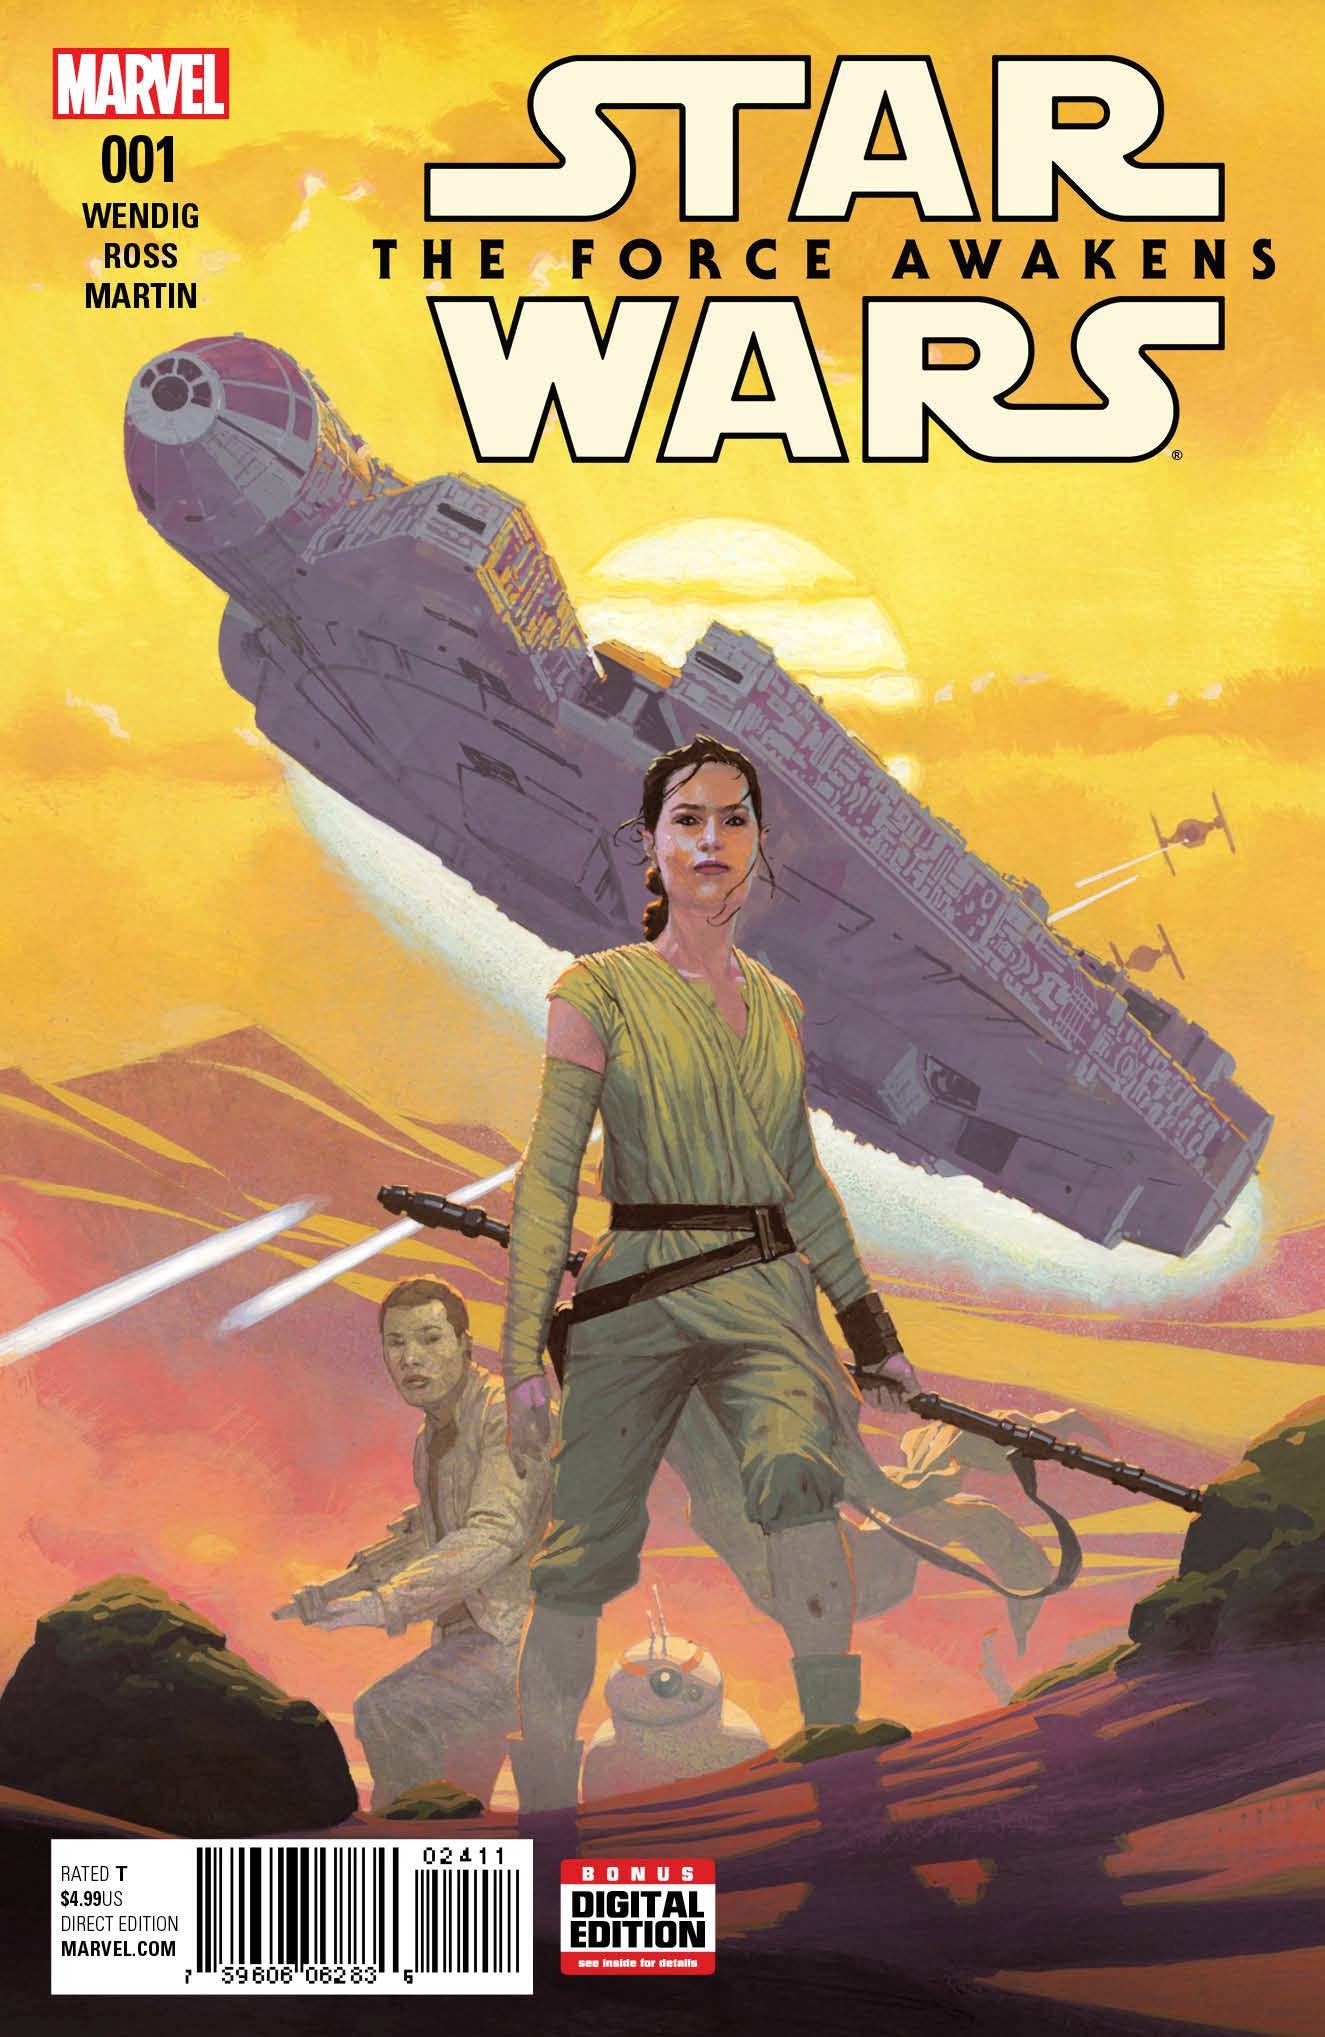 STAR WARS FORCE AWAKENS ADAPTATION #1 (OF 5) COVER